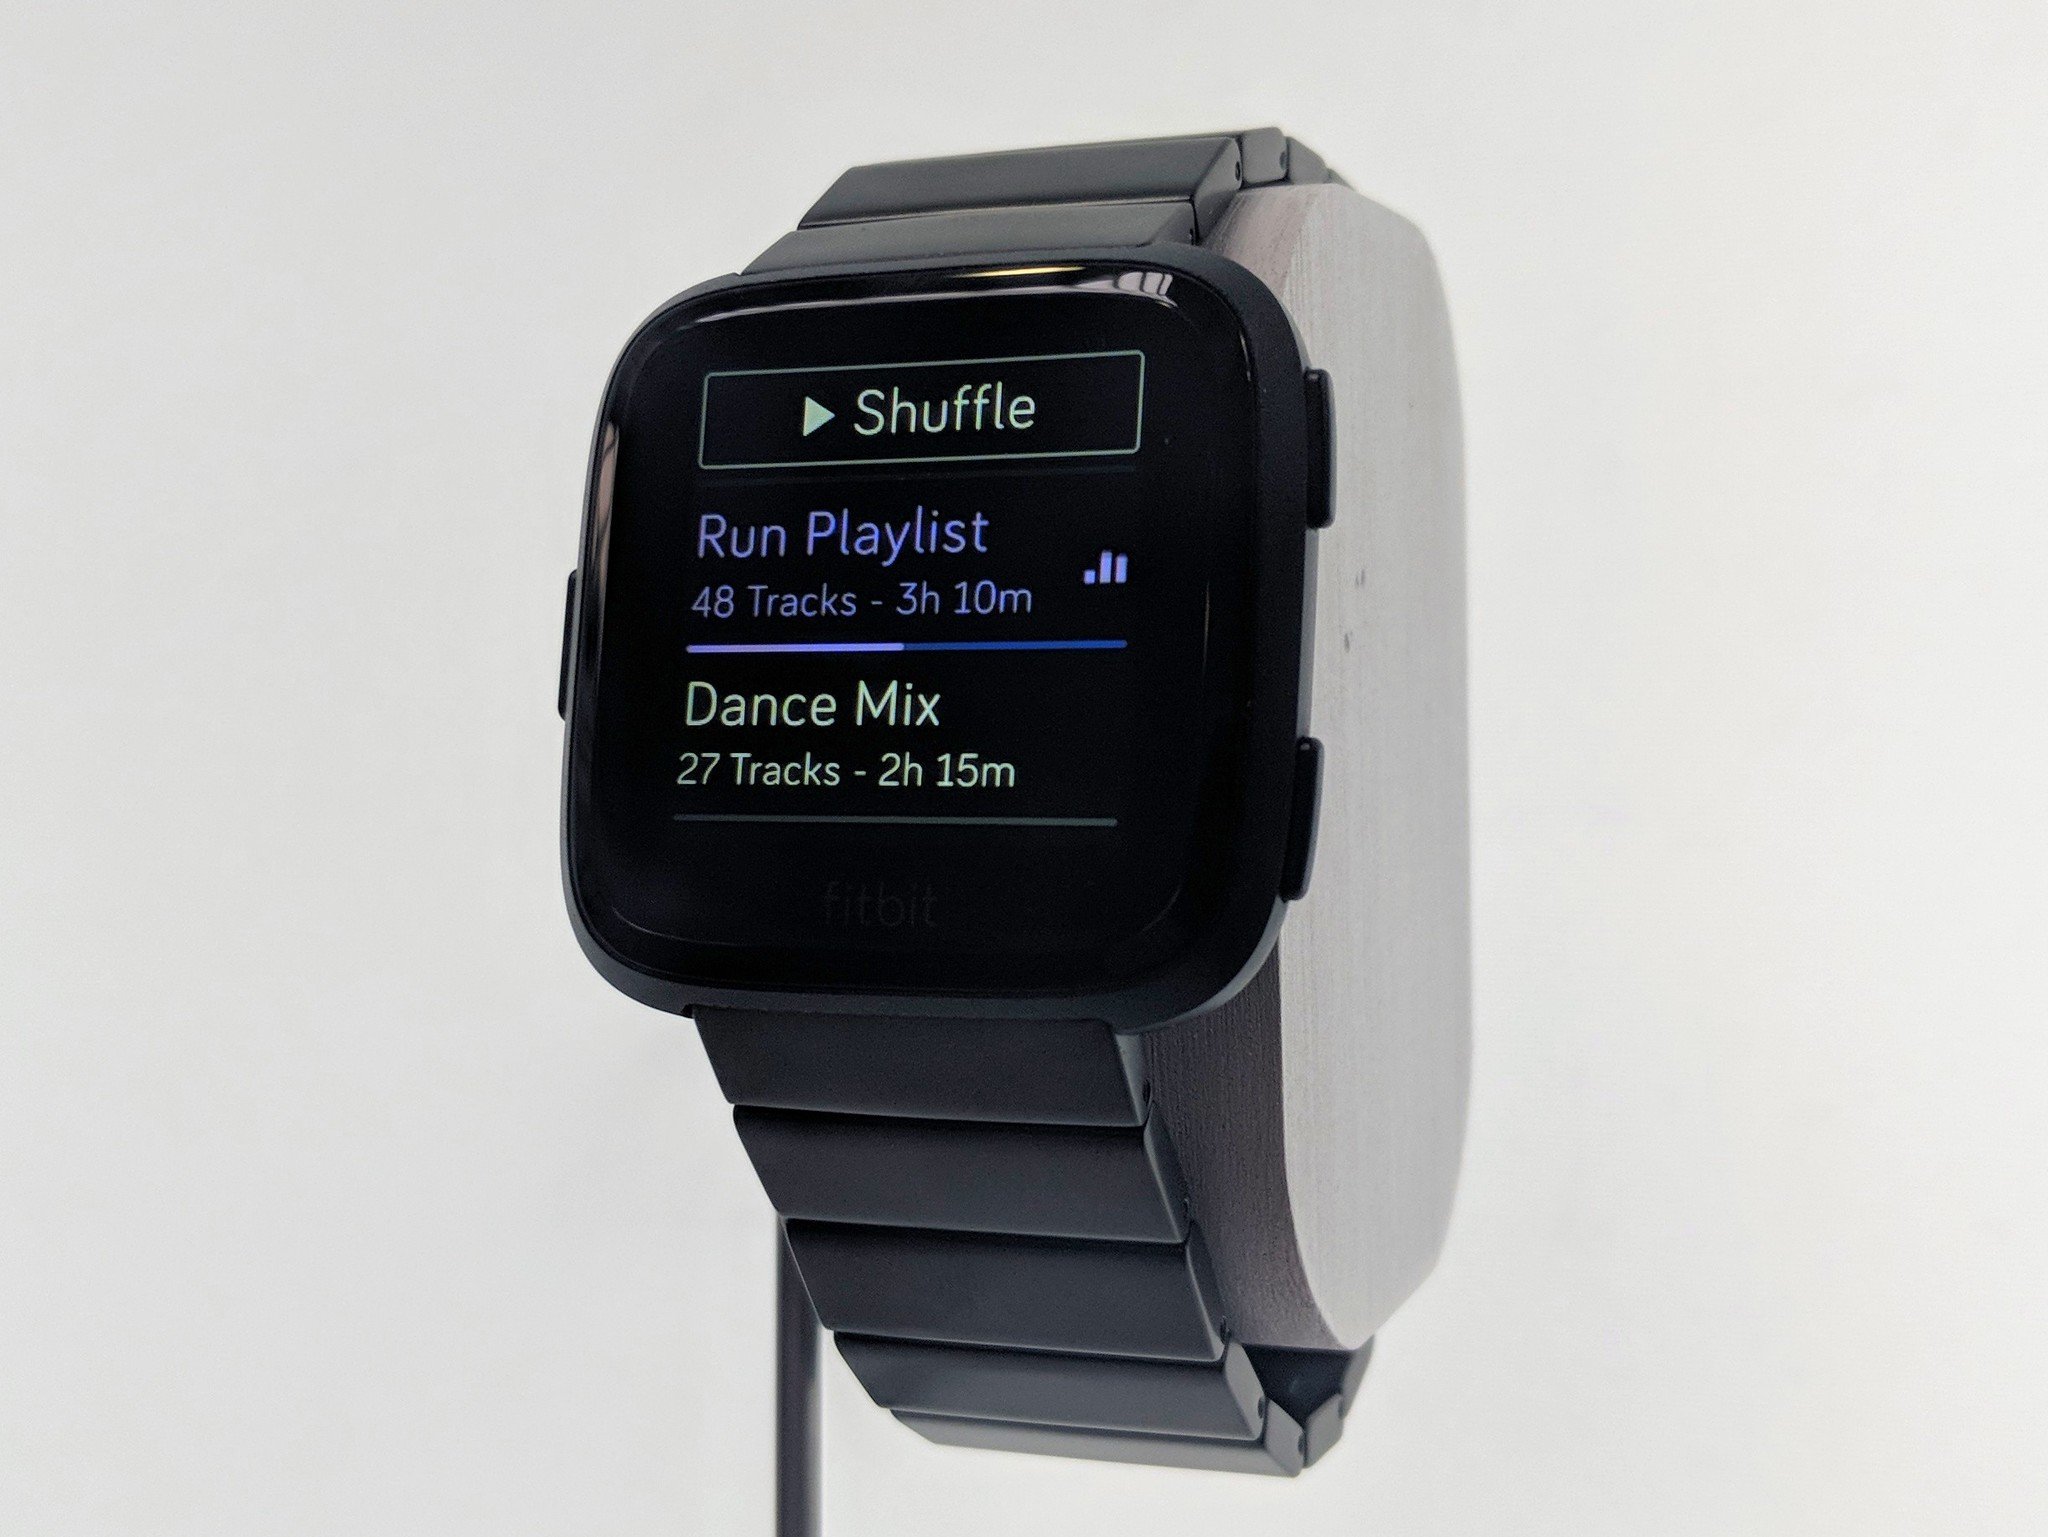 how to play music on my fitbit versa